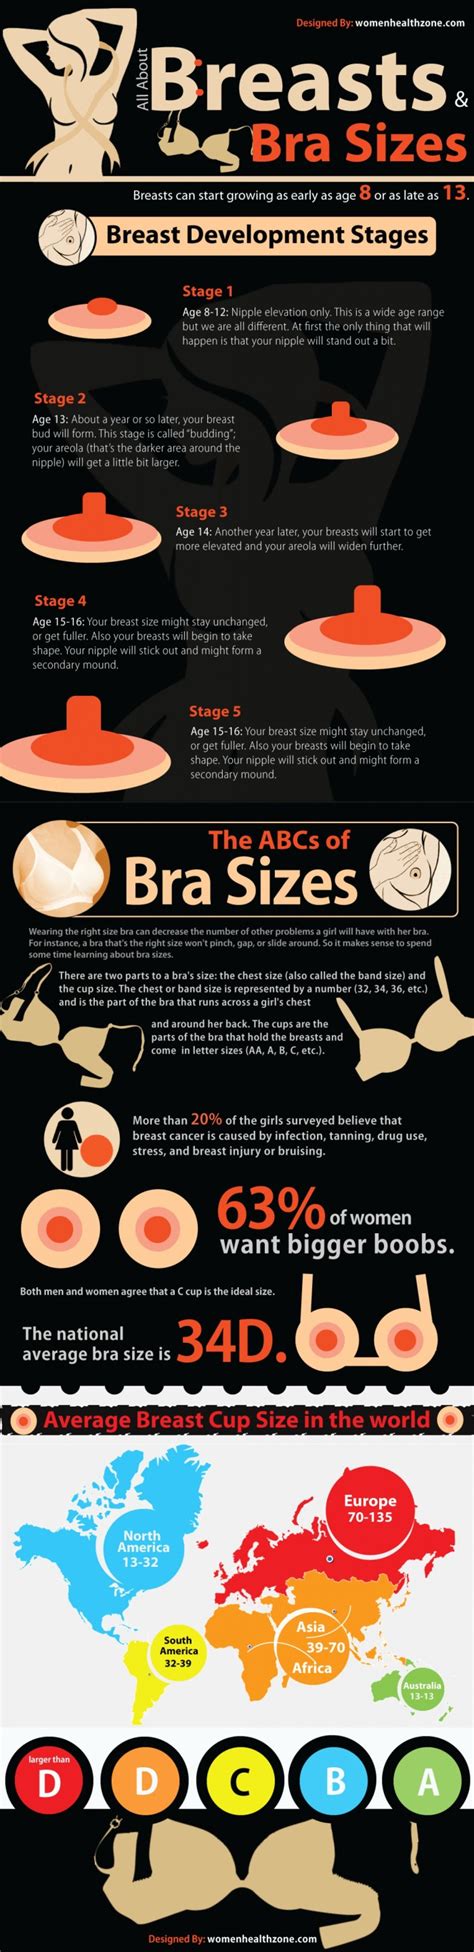 Breast Development 5 Stages Of Bra And Breast Sizes